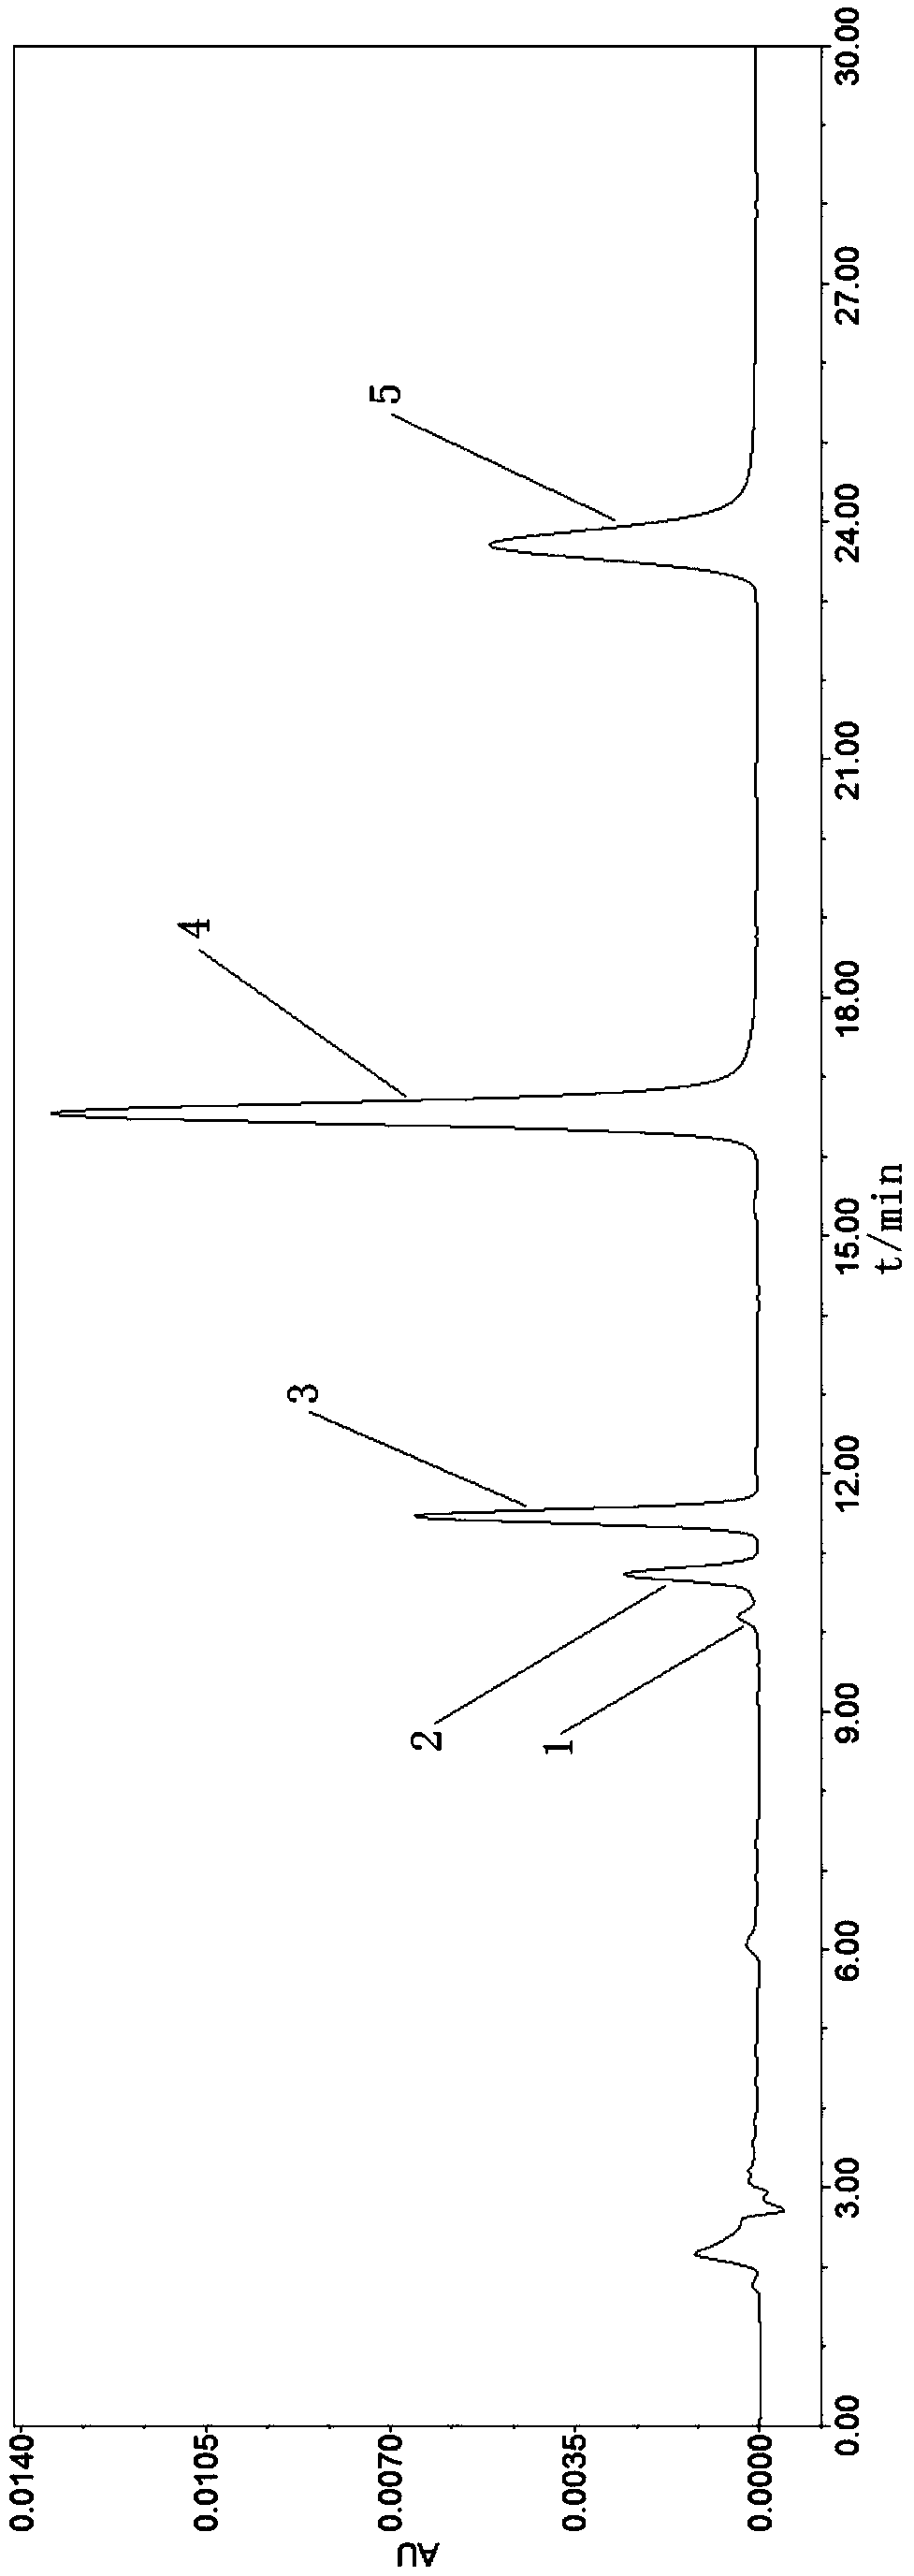 Method for simultaneously determining sanshool and capsaicin in food